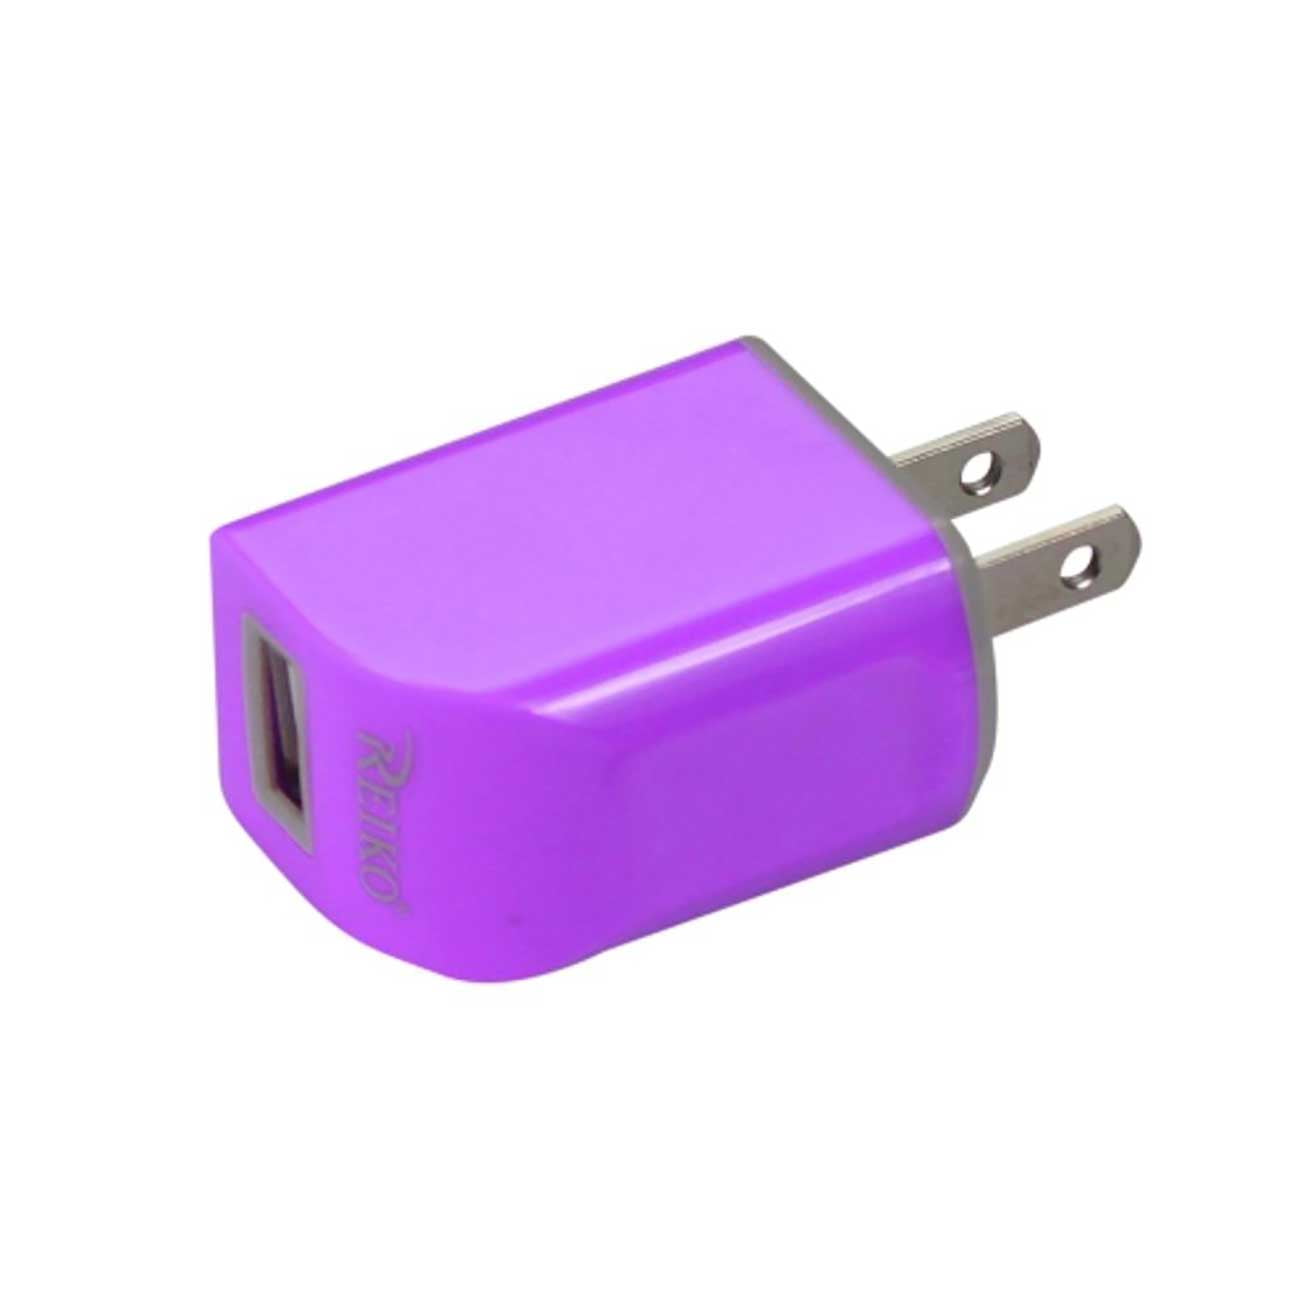 Pack Of 2] REIKO MICRO USB 1 AMP PORTABLE MICRO TRAVEL ADAPTER CHARGER WITH  CABLE IN PURPLE 